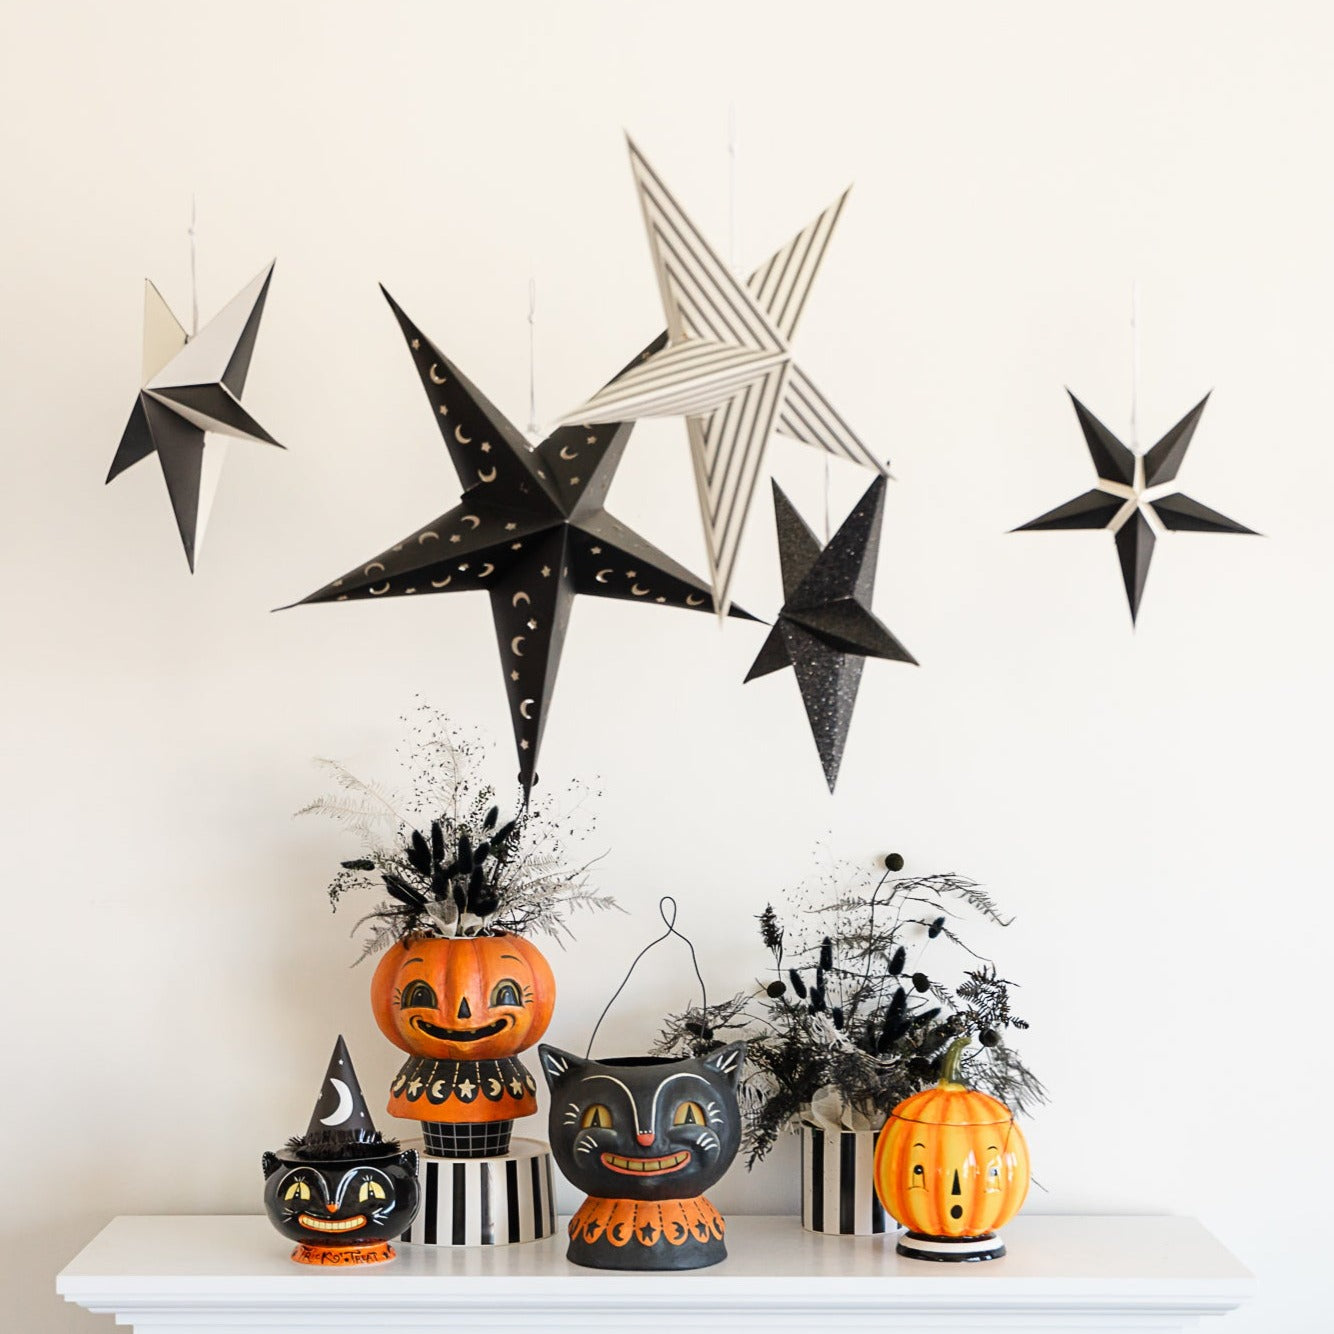 Vintage Halloween decorations and vintage Halloween party supplies at Bonjour Fête.